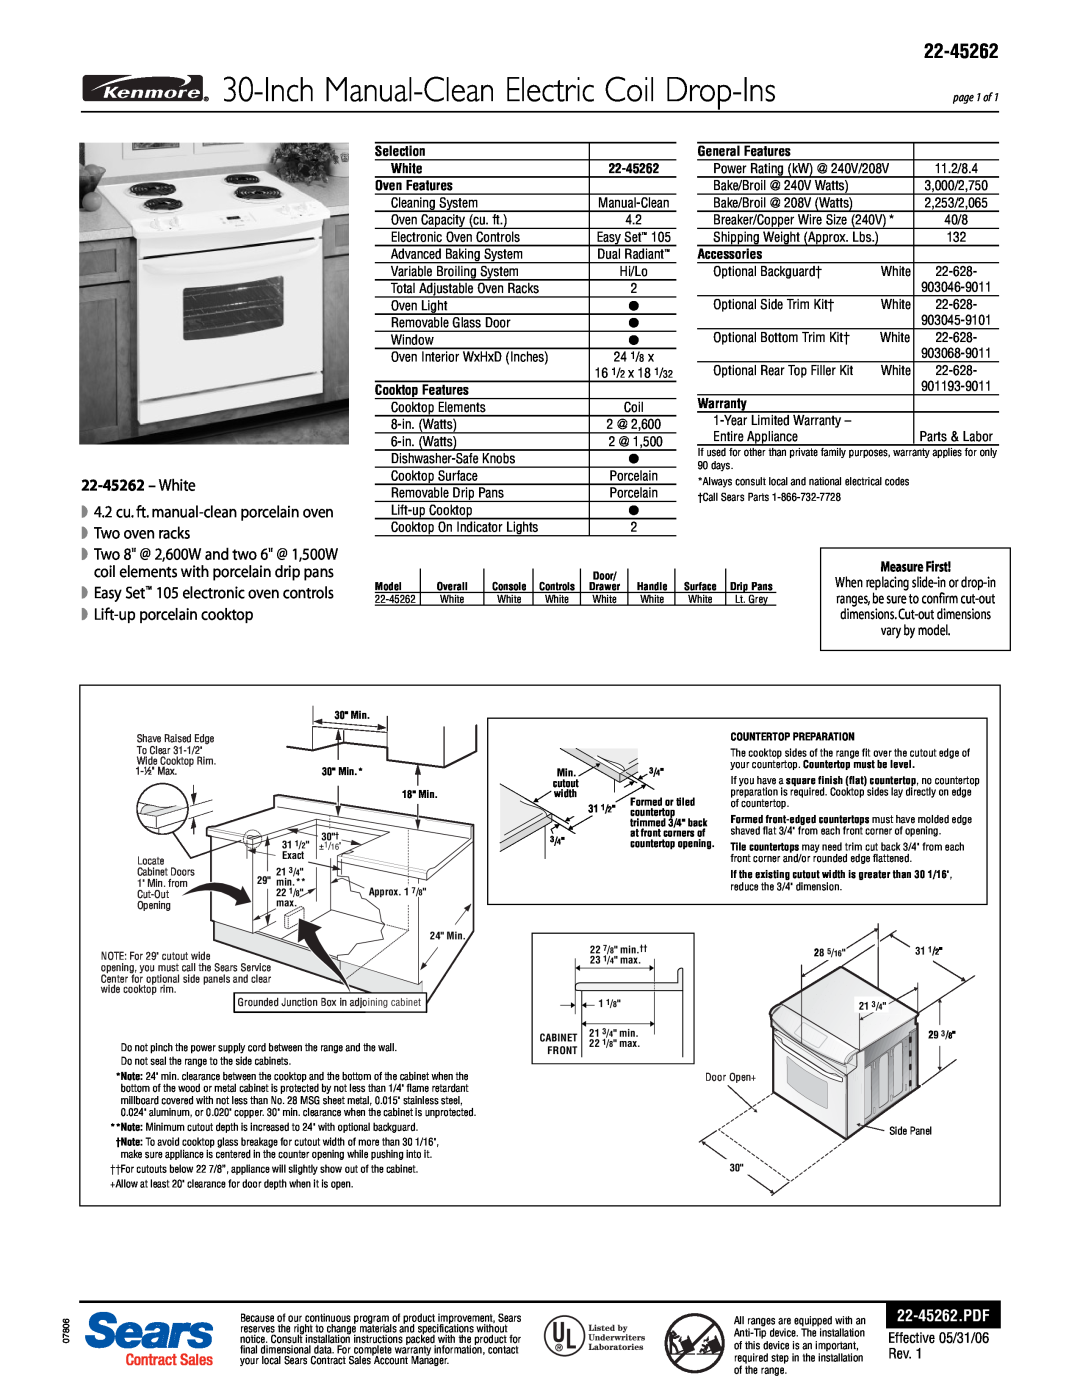 Kenmore 22-45262 specifications Inch Manual-Clean Electric Coil Drop-Ins, White, Two oven racks, Effective 05/31/06 Rev 